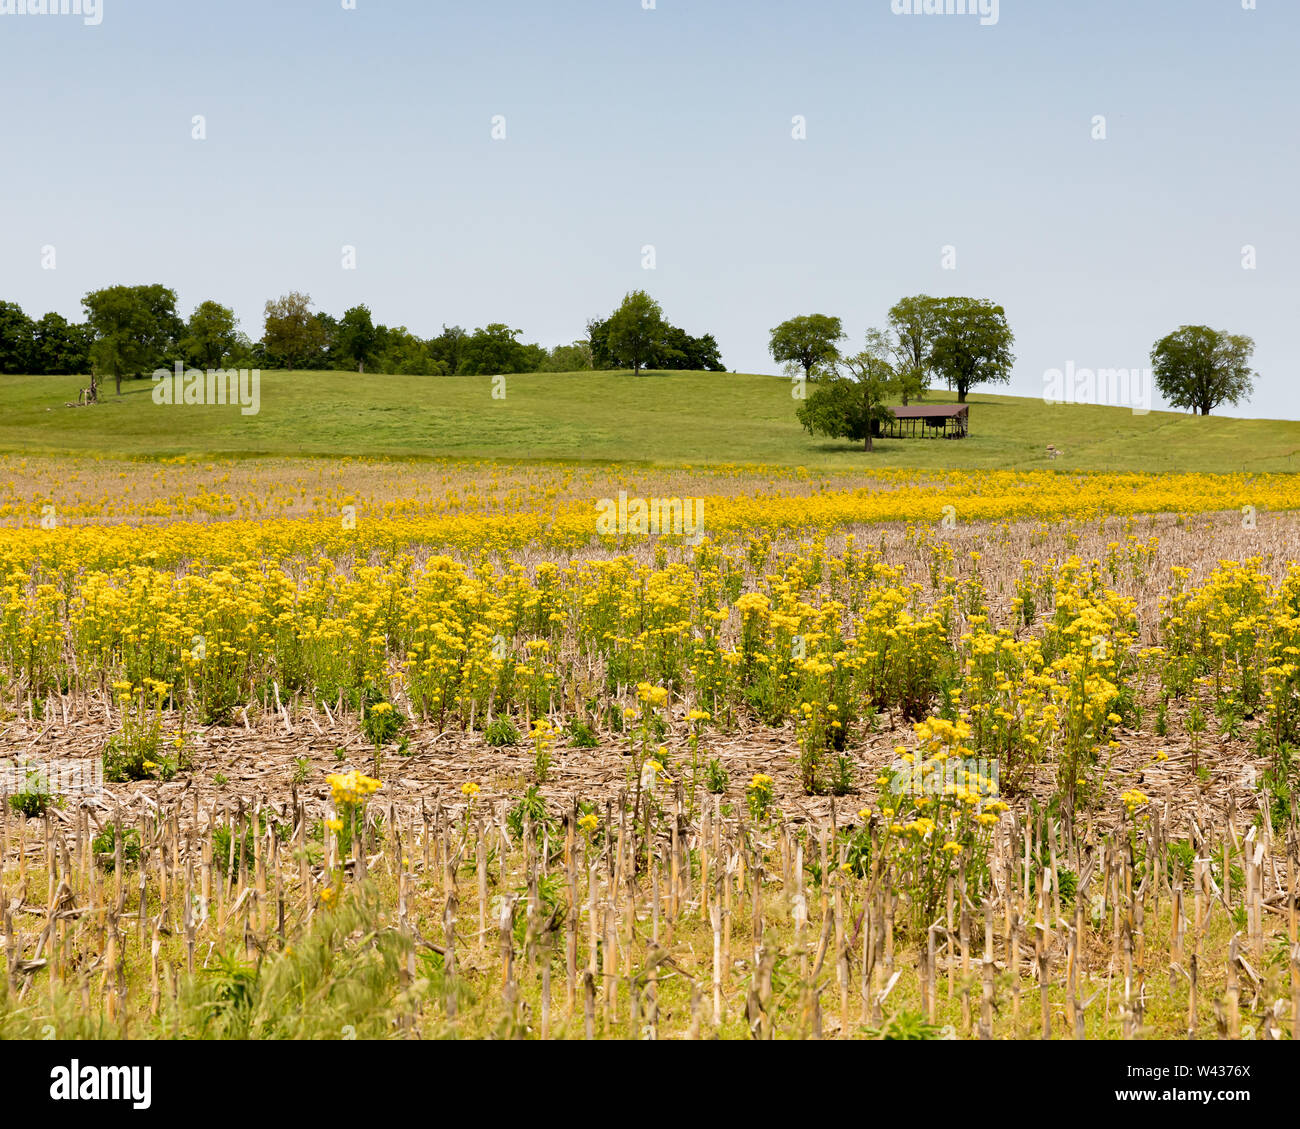 Farm field of cornstalks and flowering butter weed below a pasture and old barn on a hill in the background Stock Photo